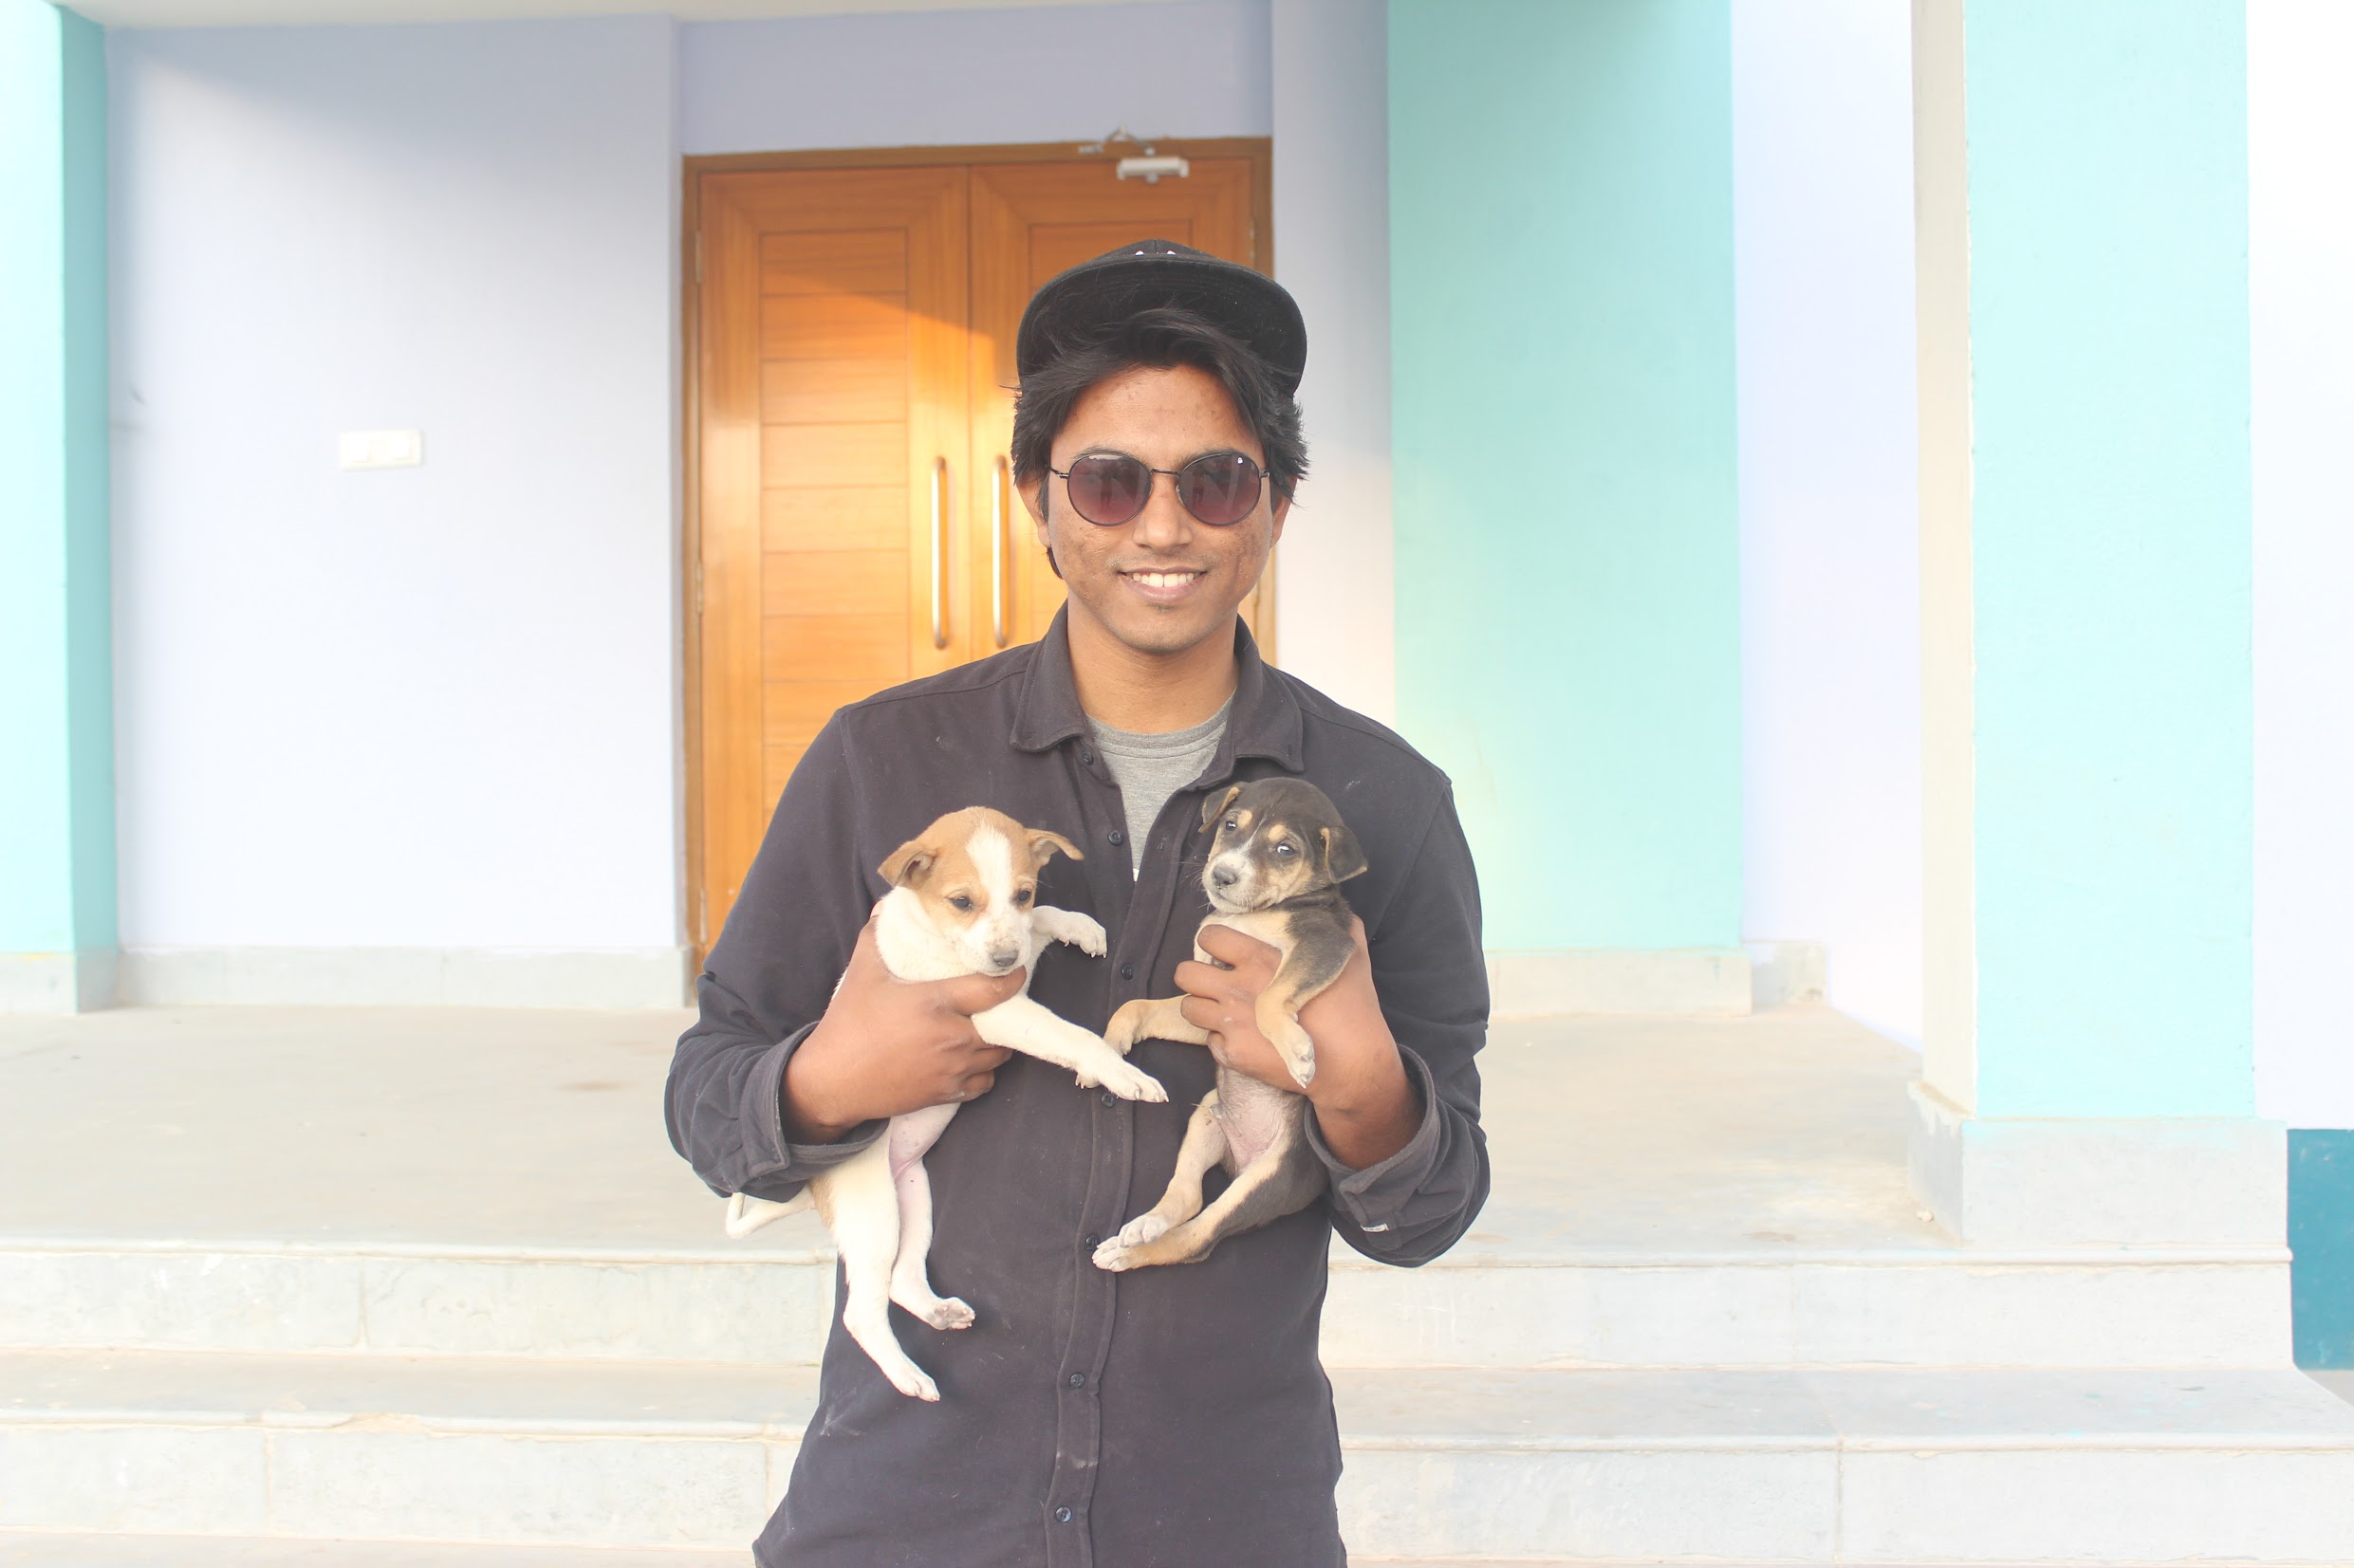 Happy me(Sourajit Saha) with two puppies!